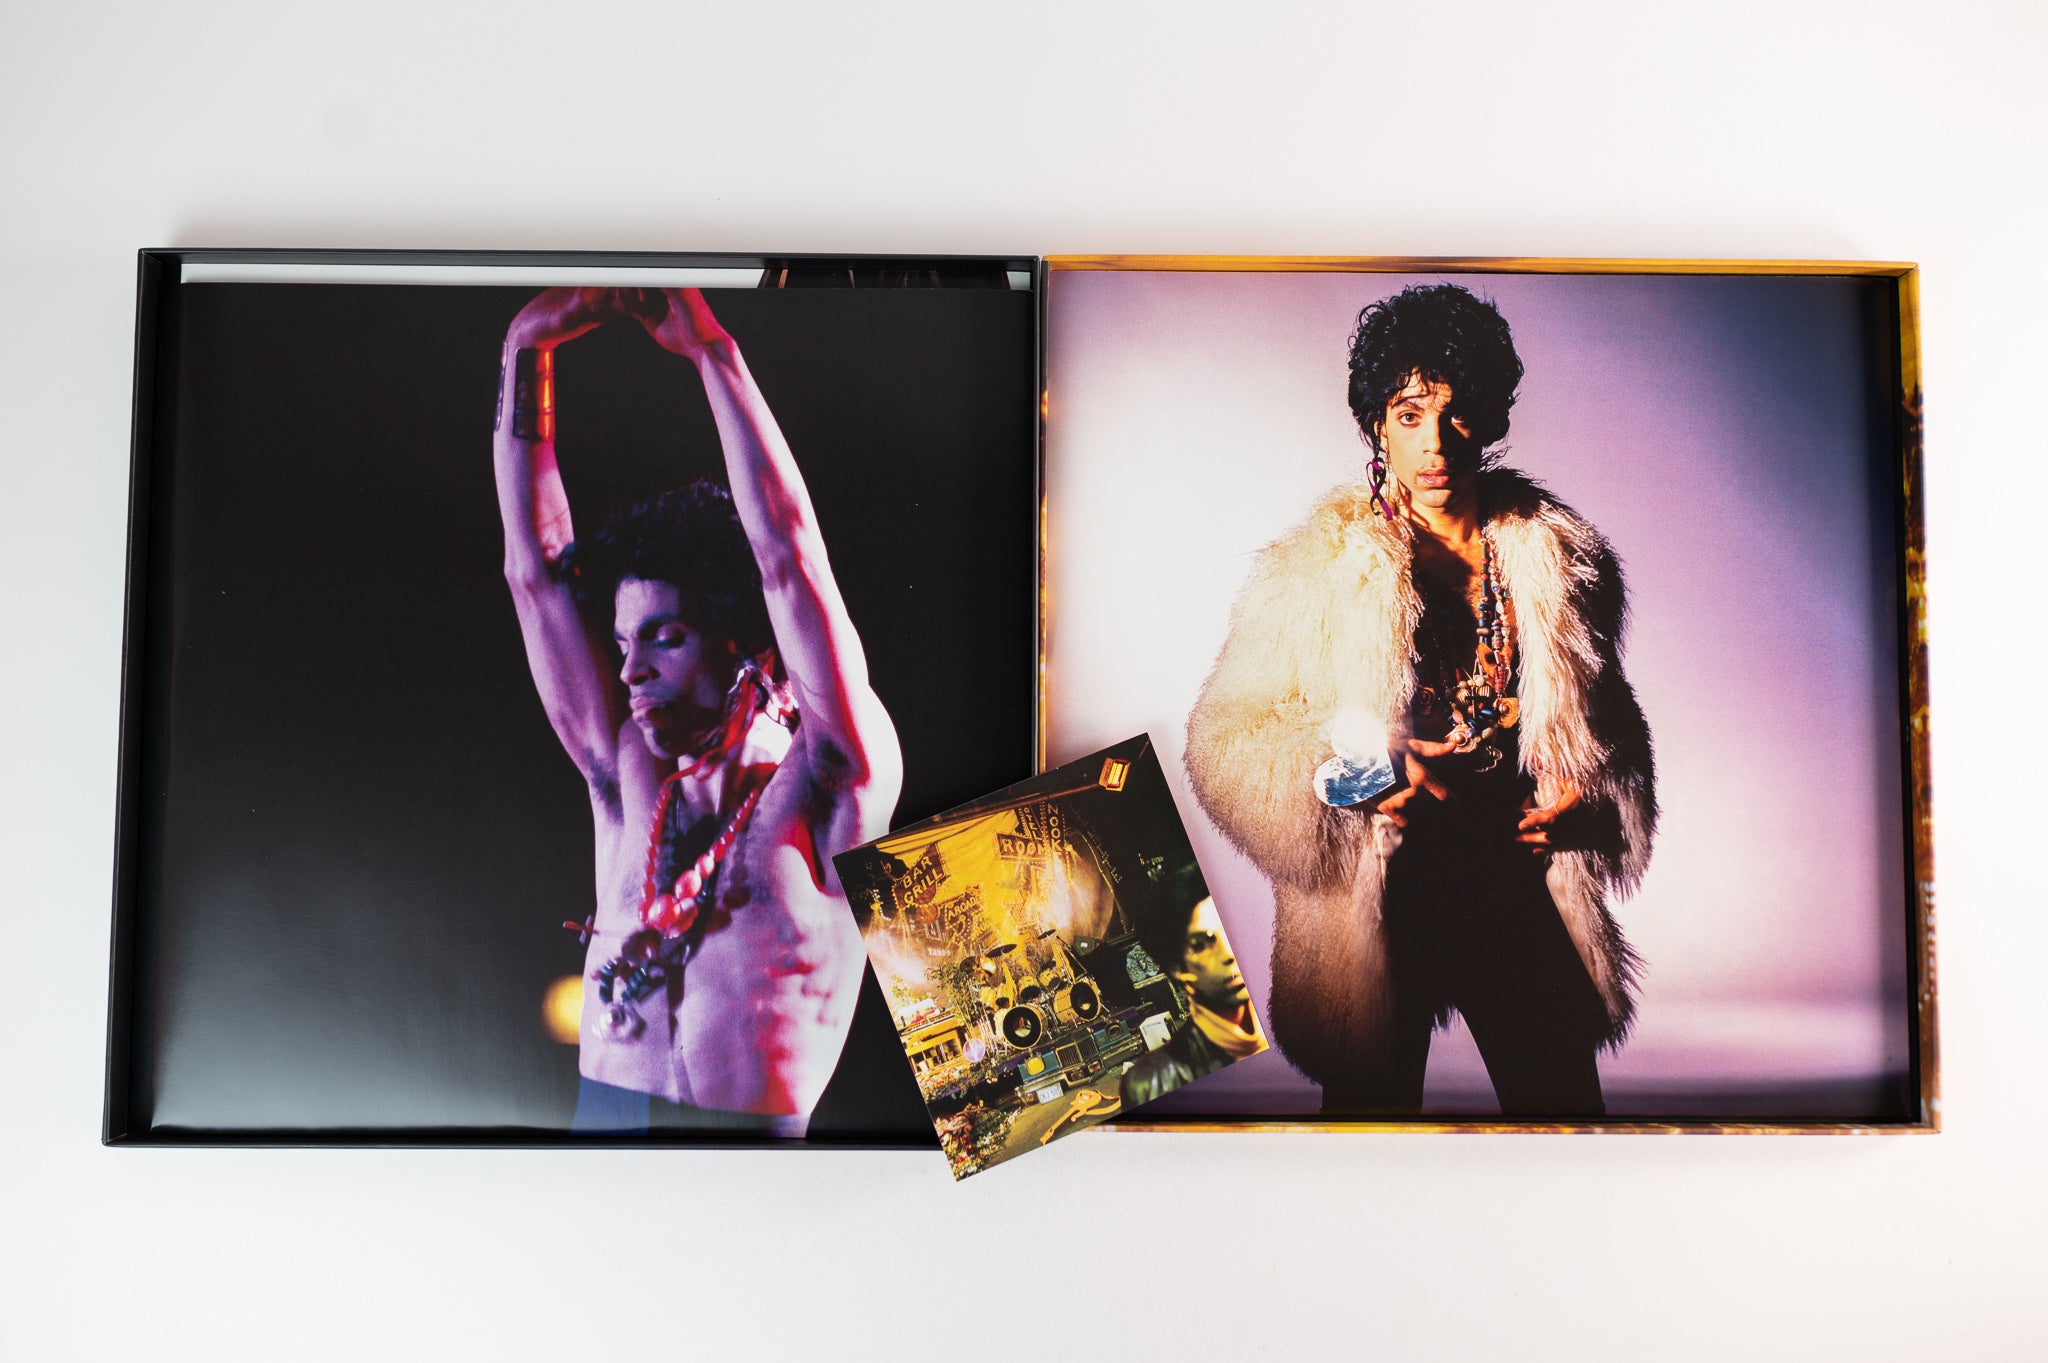 Prince - Sign "O" The Times on NPG Paisley Park Deluxe Edition Box Set Reissue